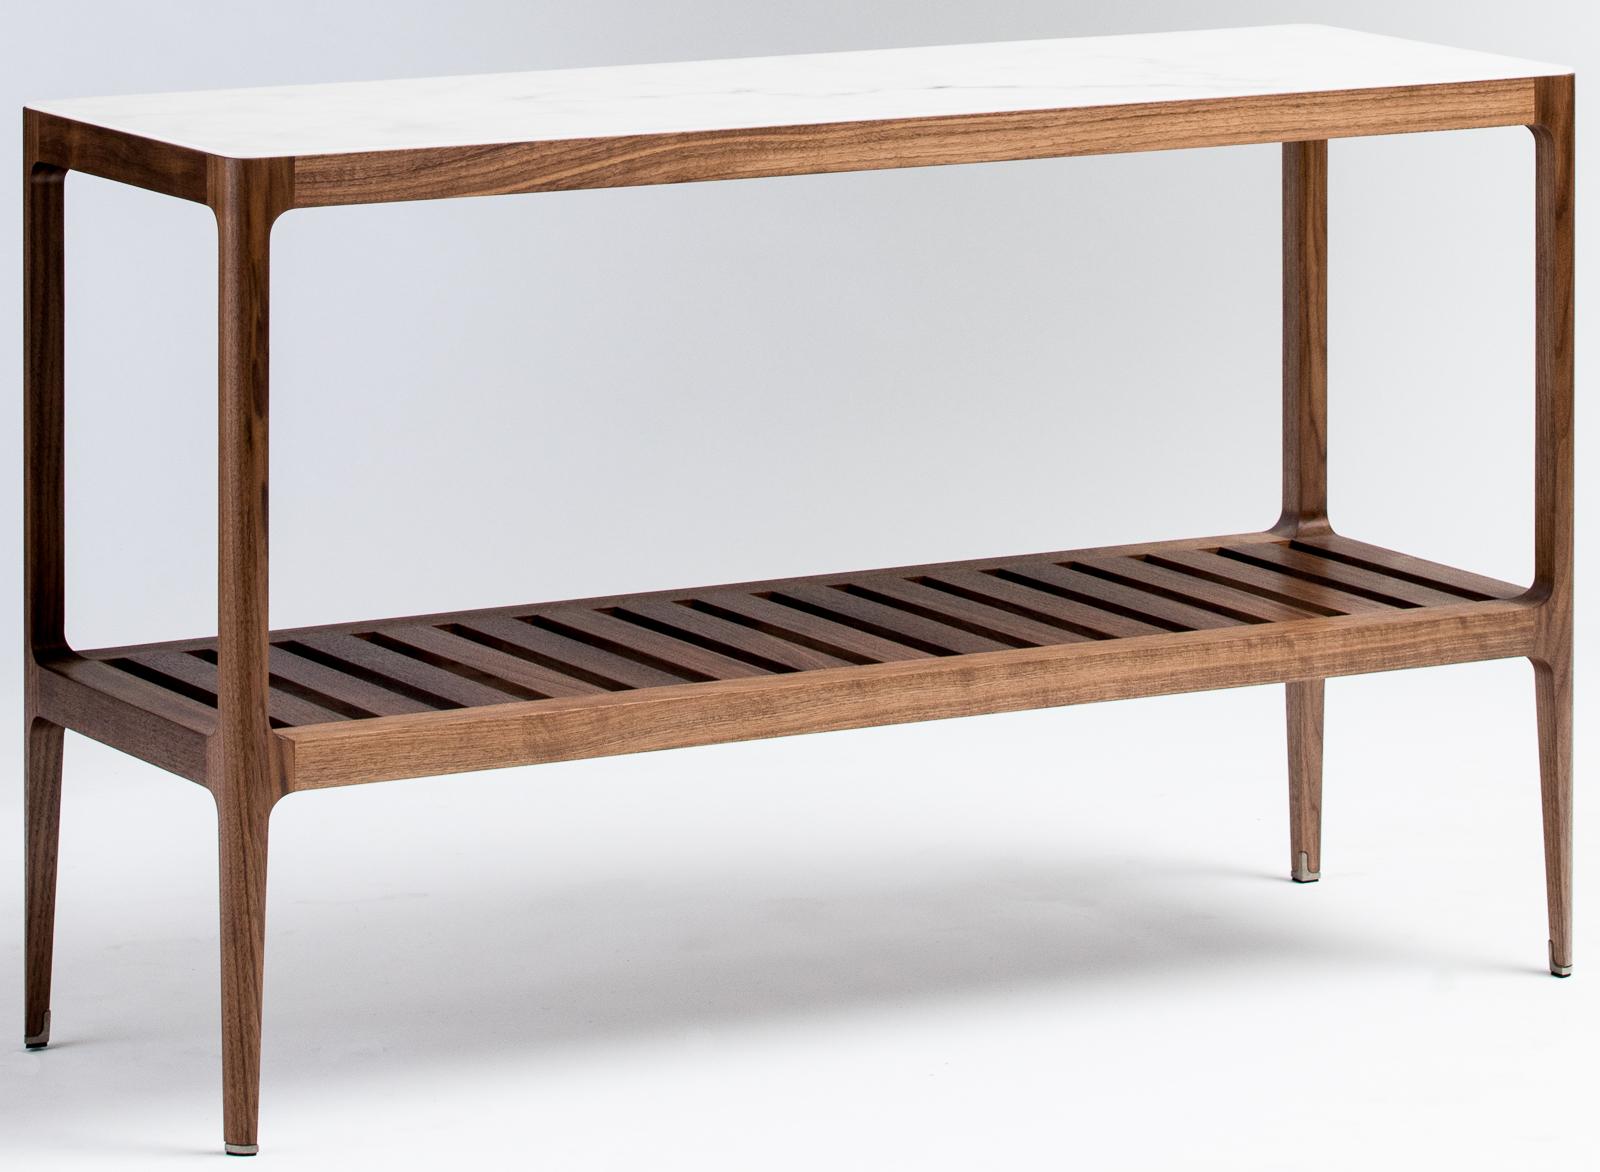 This modern walnut console table designed and fabricated by Munson Furniture fits beautifully with traditional and contemporary designs and can be tailored to fit your space. See photos for just a few of the many customizable options. Every detail